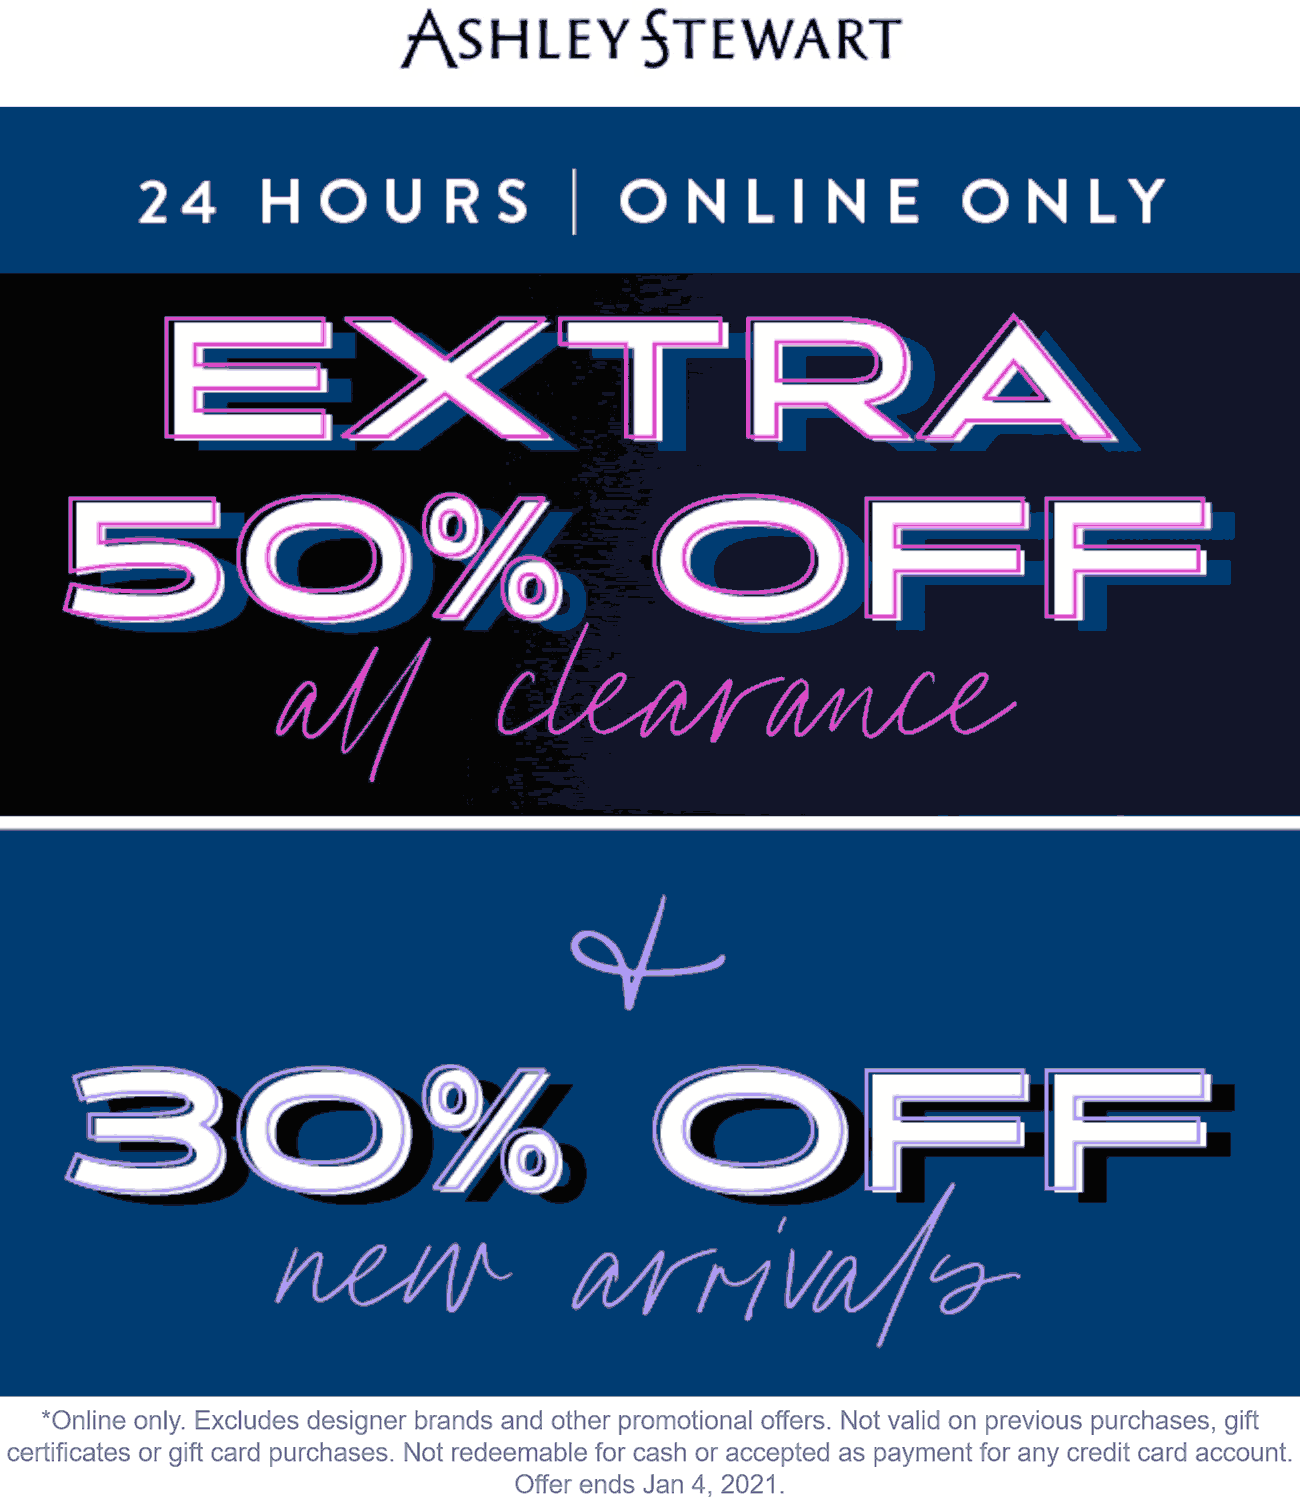 Ashley Stewart stores Coupon  30% off new arrivals & 50% off clearance online today at Ashley Stewart #ashleystewart 